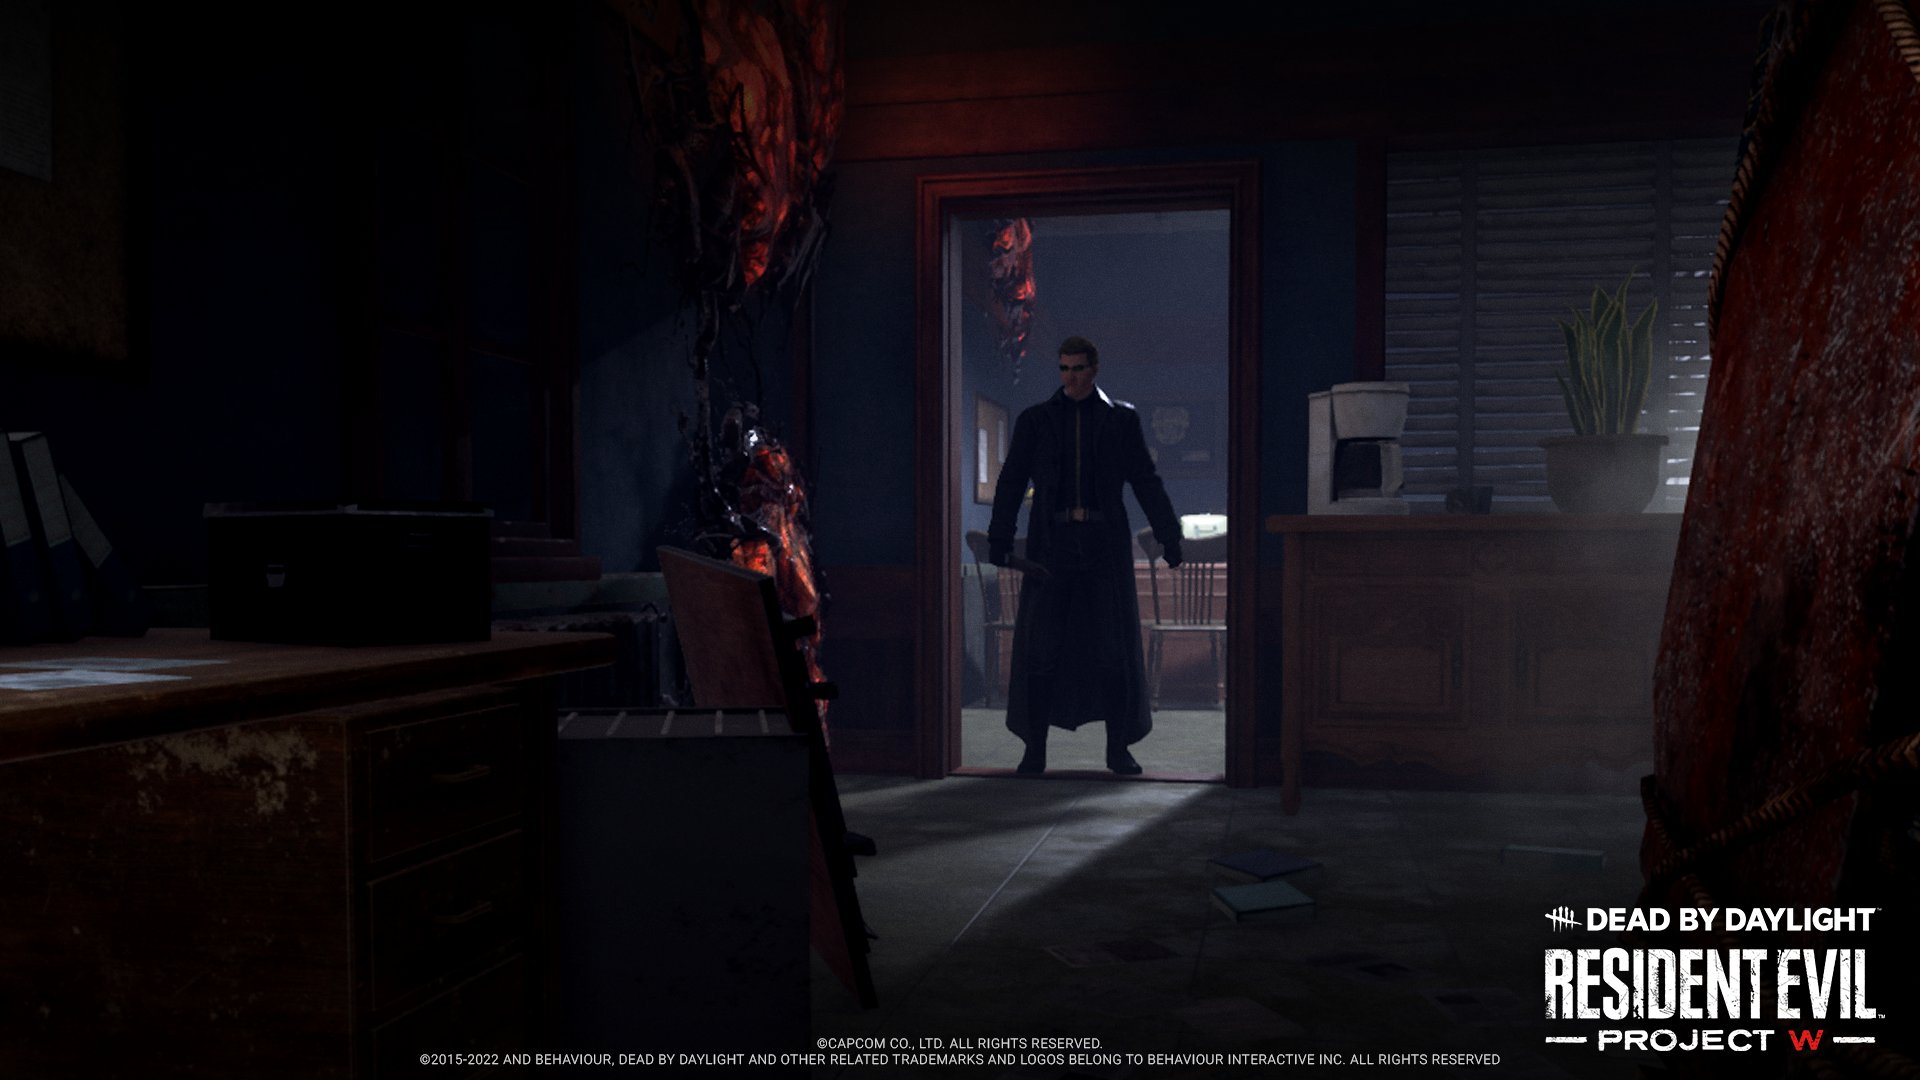 An image from Dead by Daylight showing Albert Wesker standing in the doorway